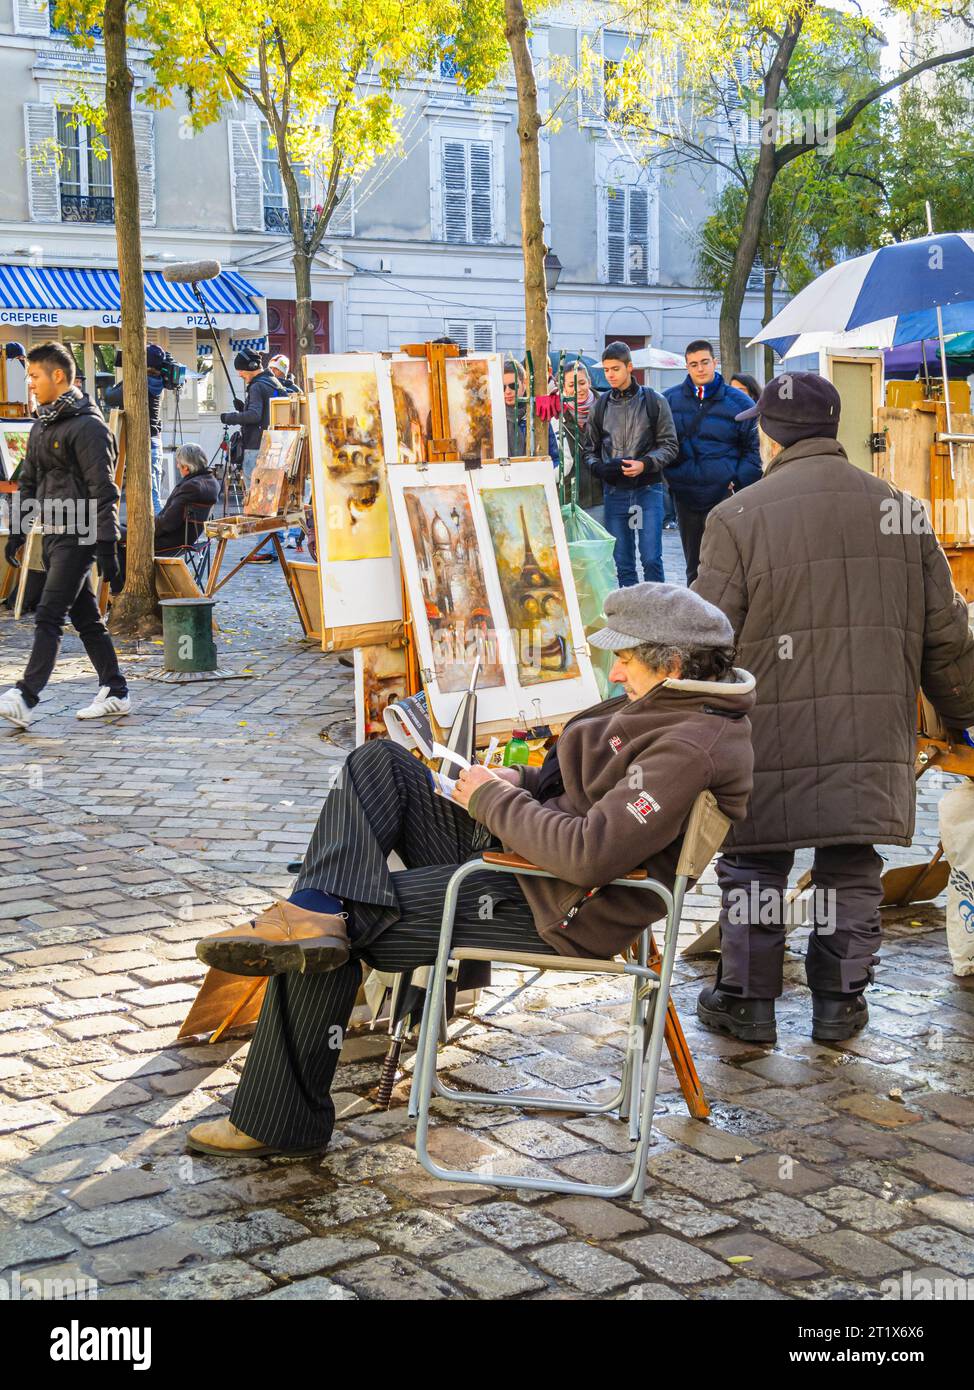 Artists at work painting and displaying pictures for sale in Place du Tertre, Montmartre, 18th arrondissement, Paris, France Stock Photo